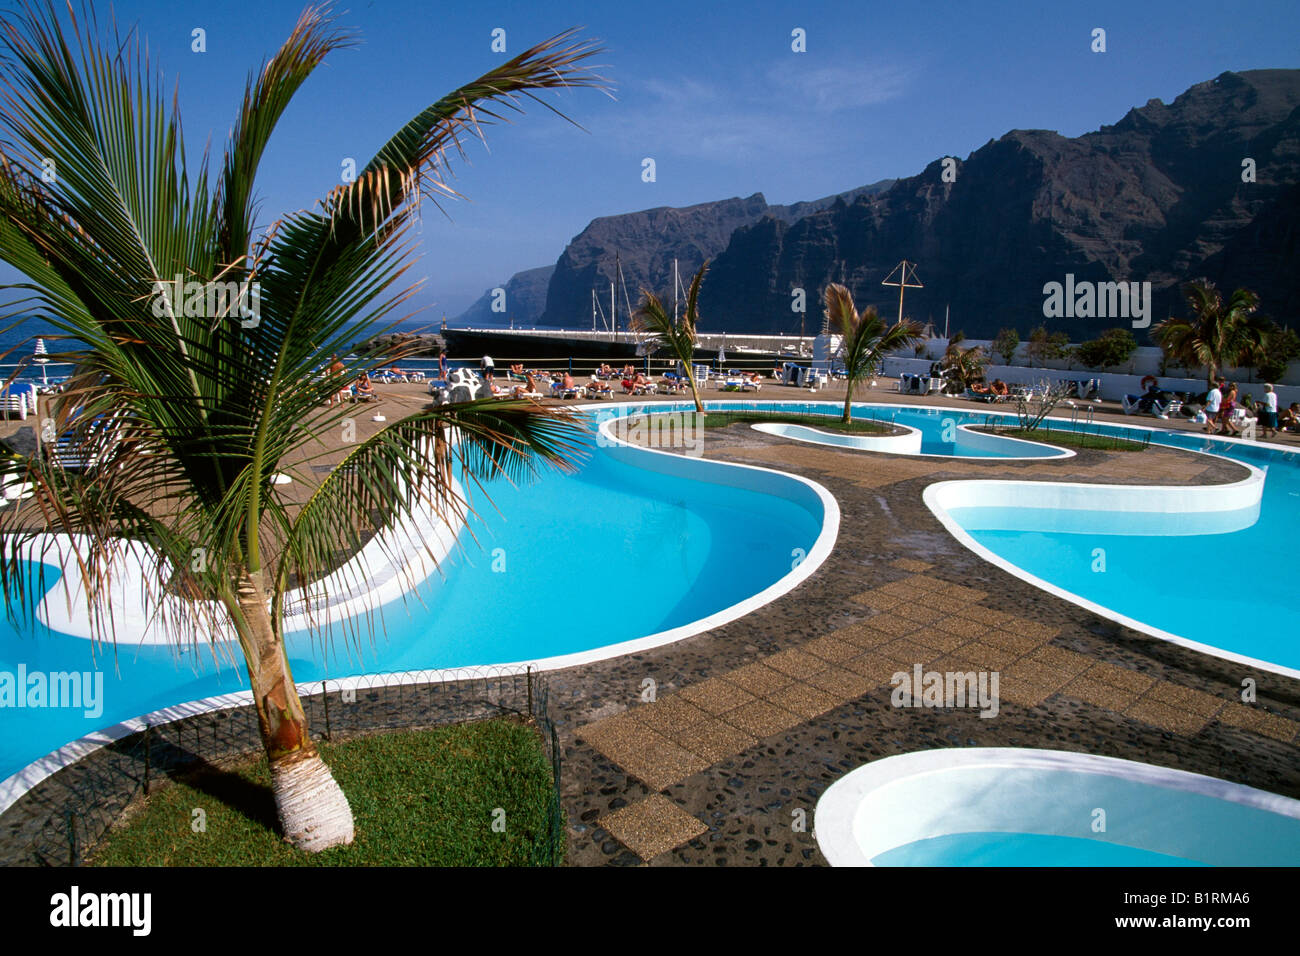 Hotel swimming pool, Los Gigantes, Tenerife, Canary Islands, Spain Stock Photo